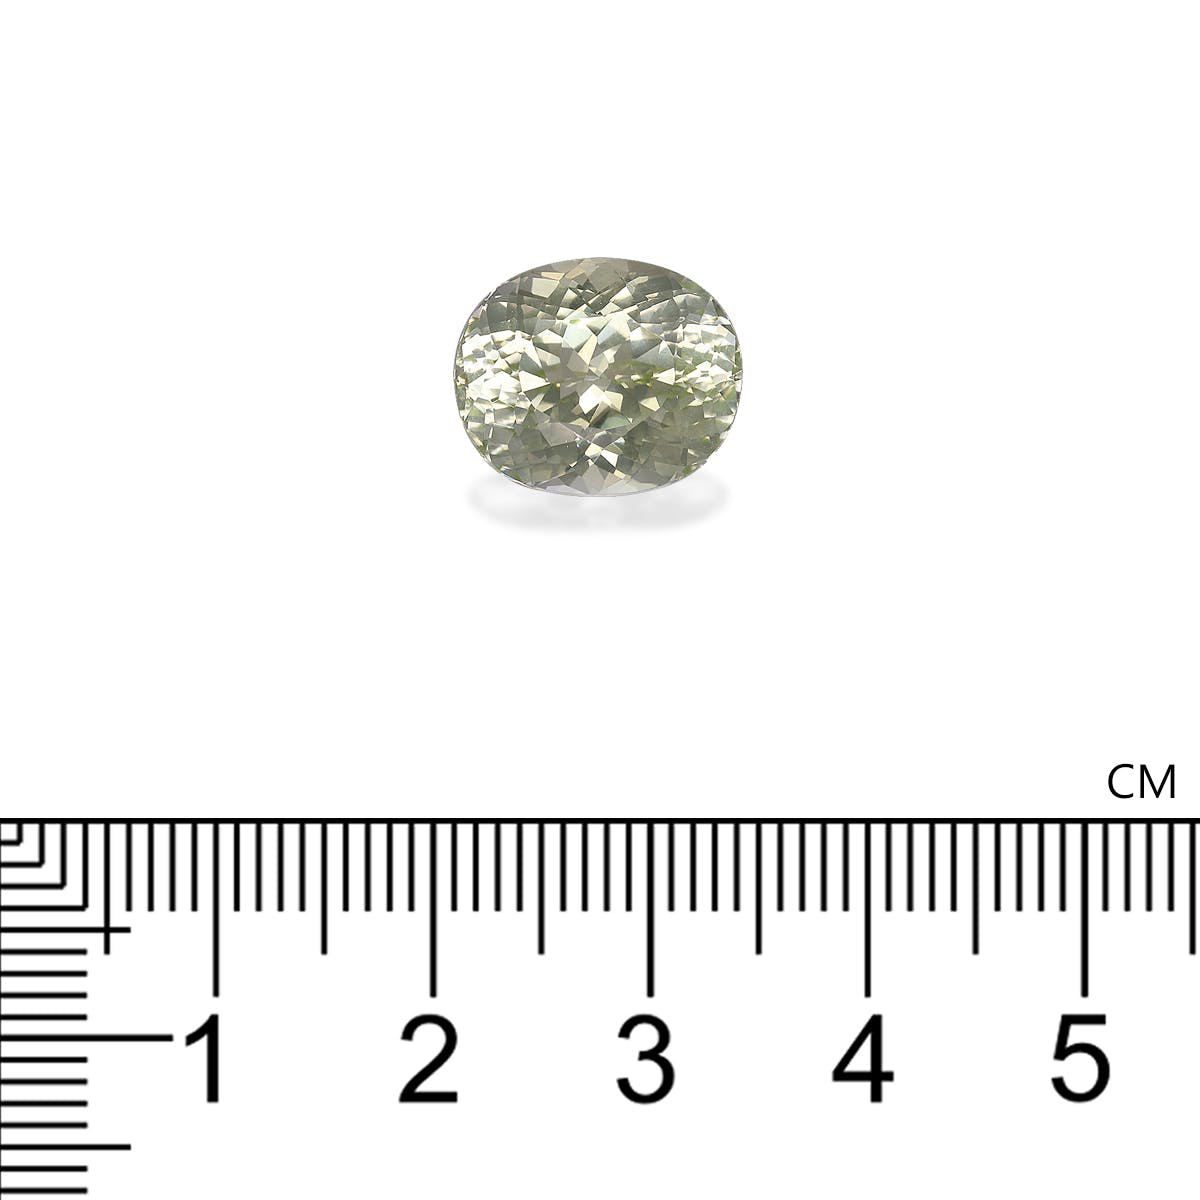 Picture of Mist Green Tourmaline 8.47ct - 13x11mm (TG1072)